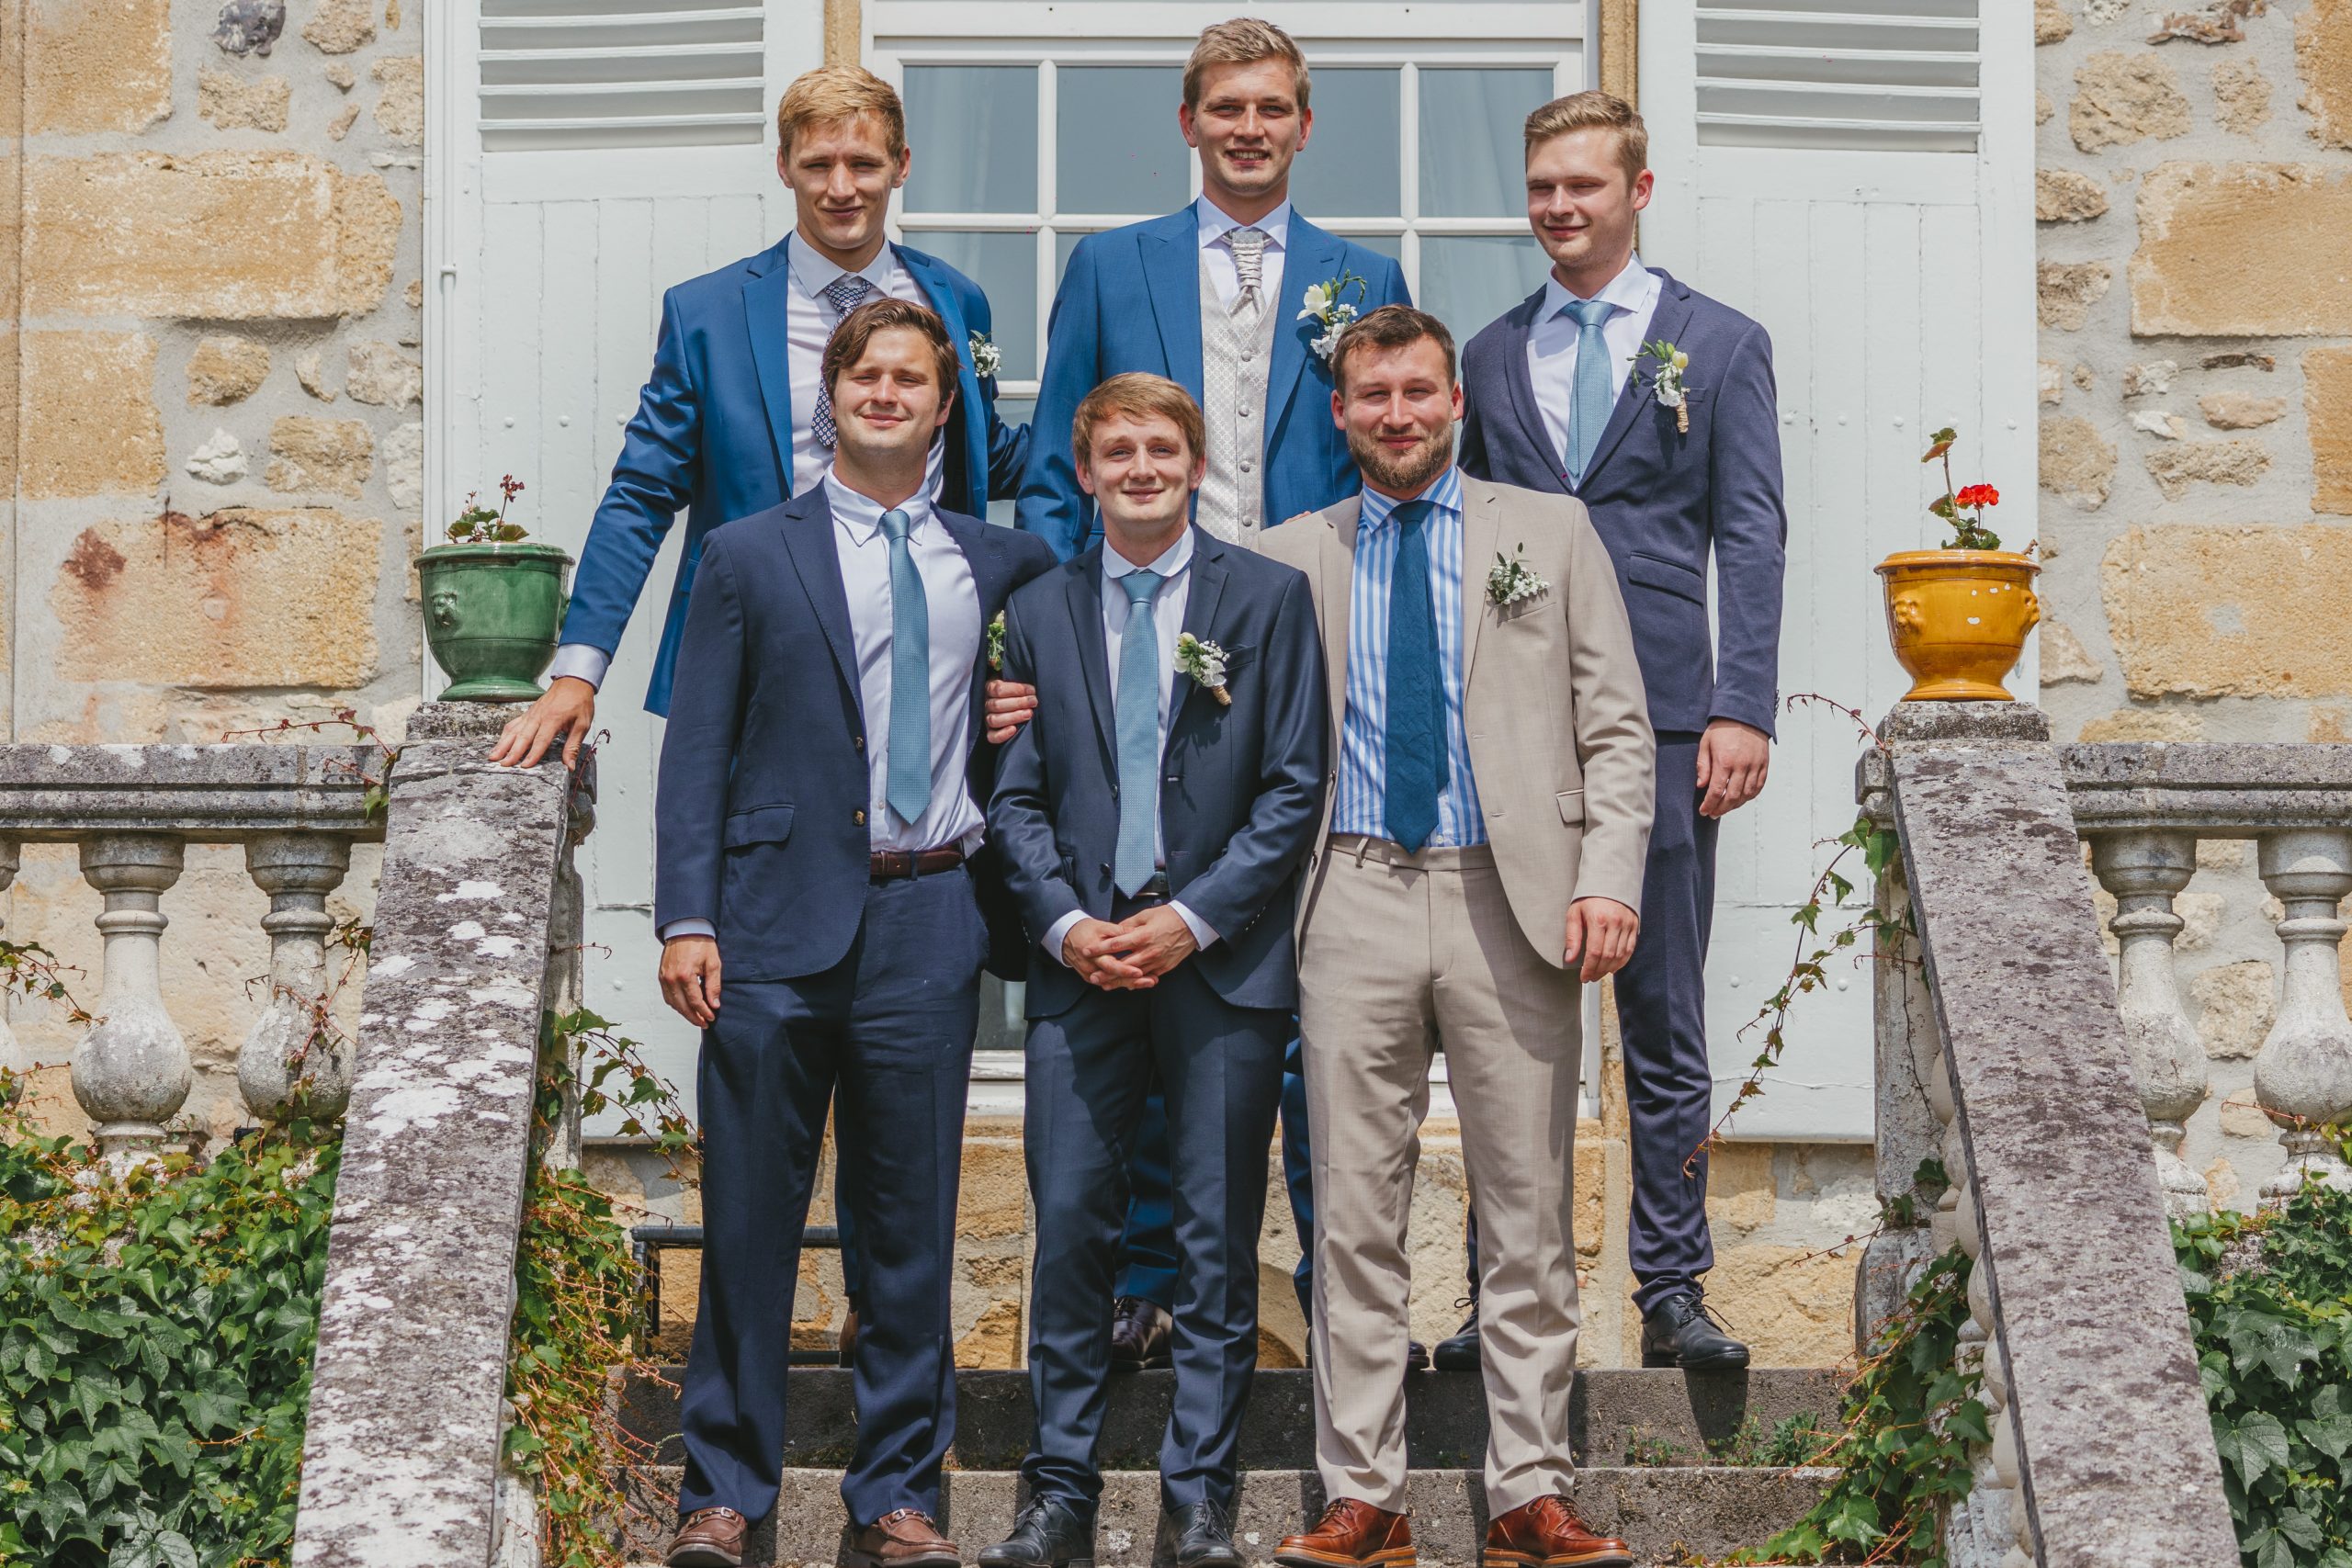 The handsome wedding party in blue includes, (back row) Charles Fleury, Théo Lunte, Jannes Lunte-BrüggenJürge, (front row) Edward Mitchell, Emile Fleury, and Paul Richard.